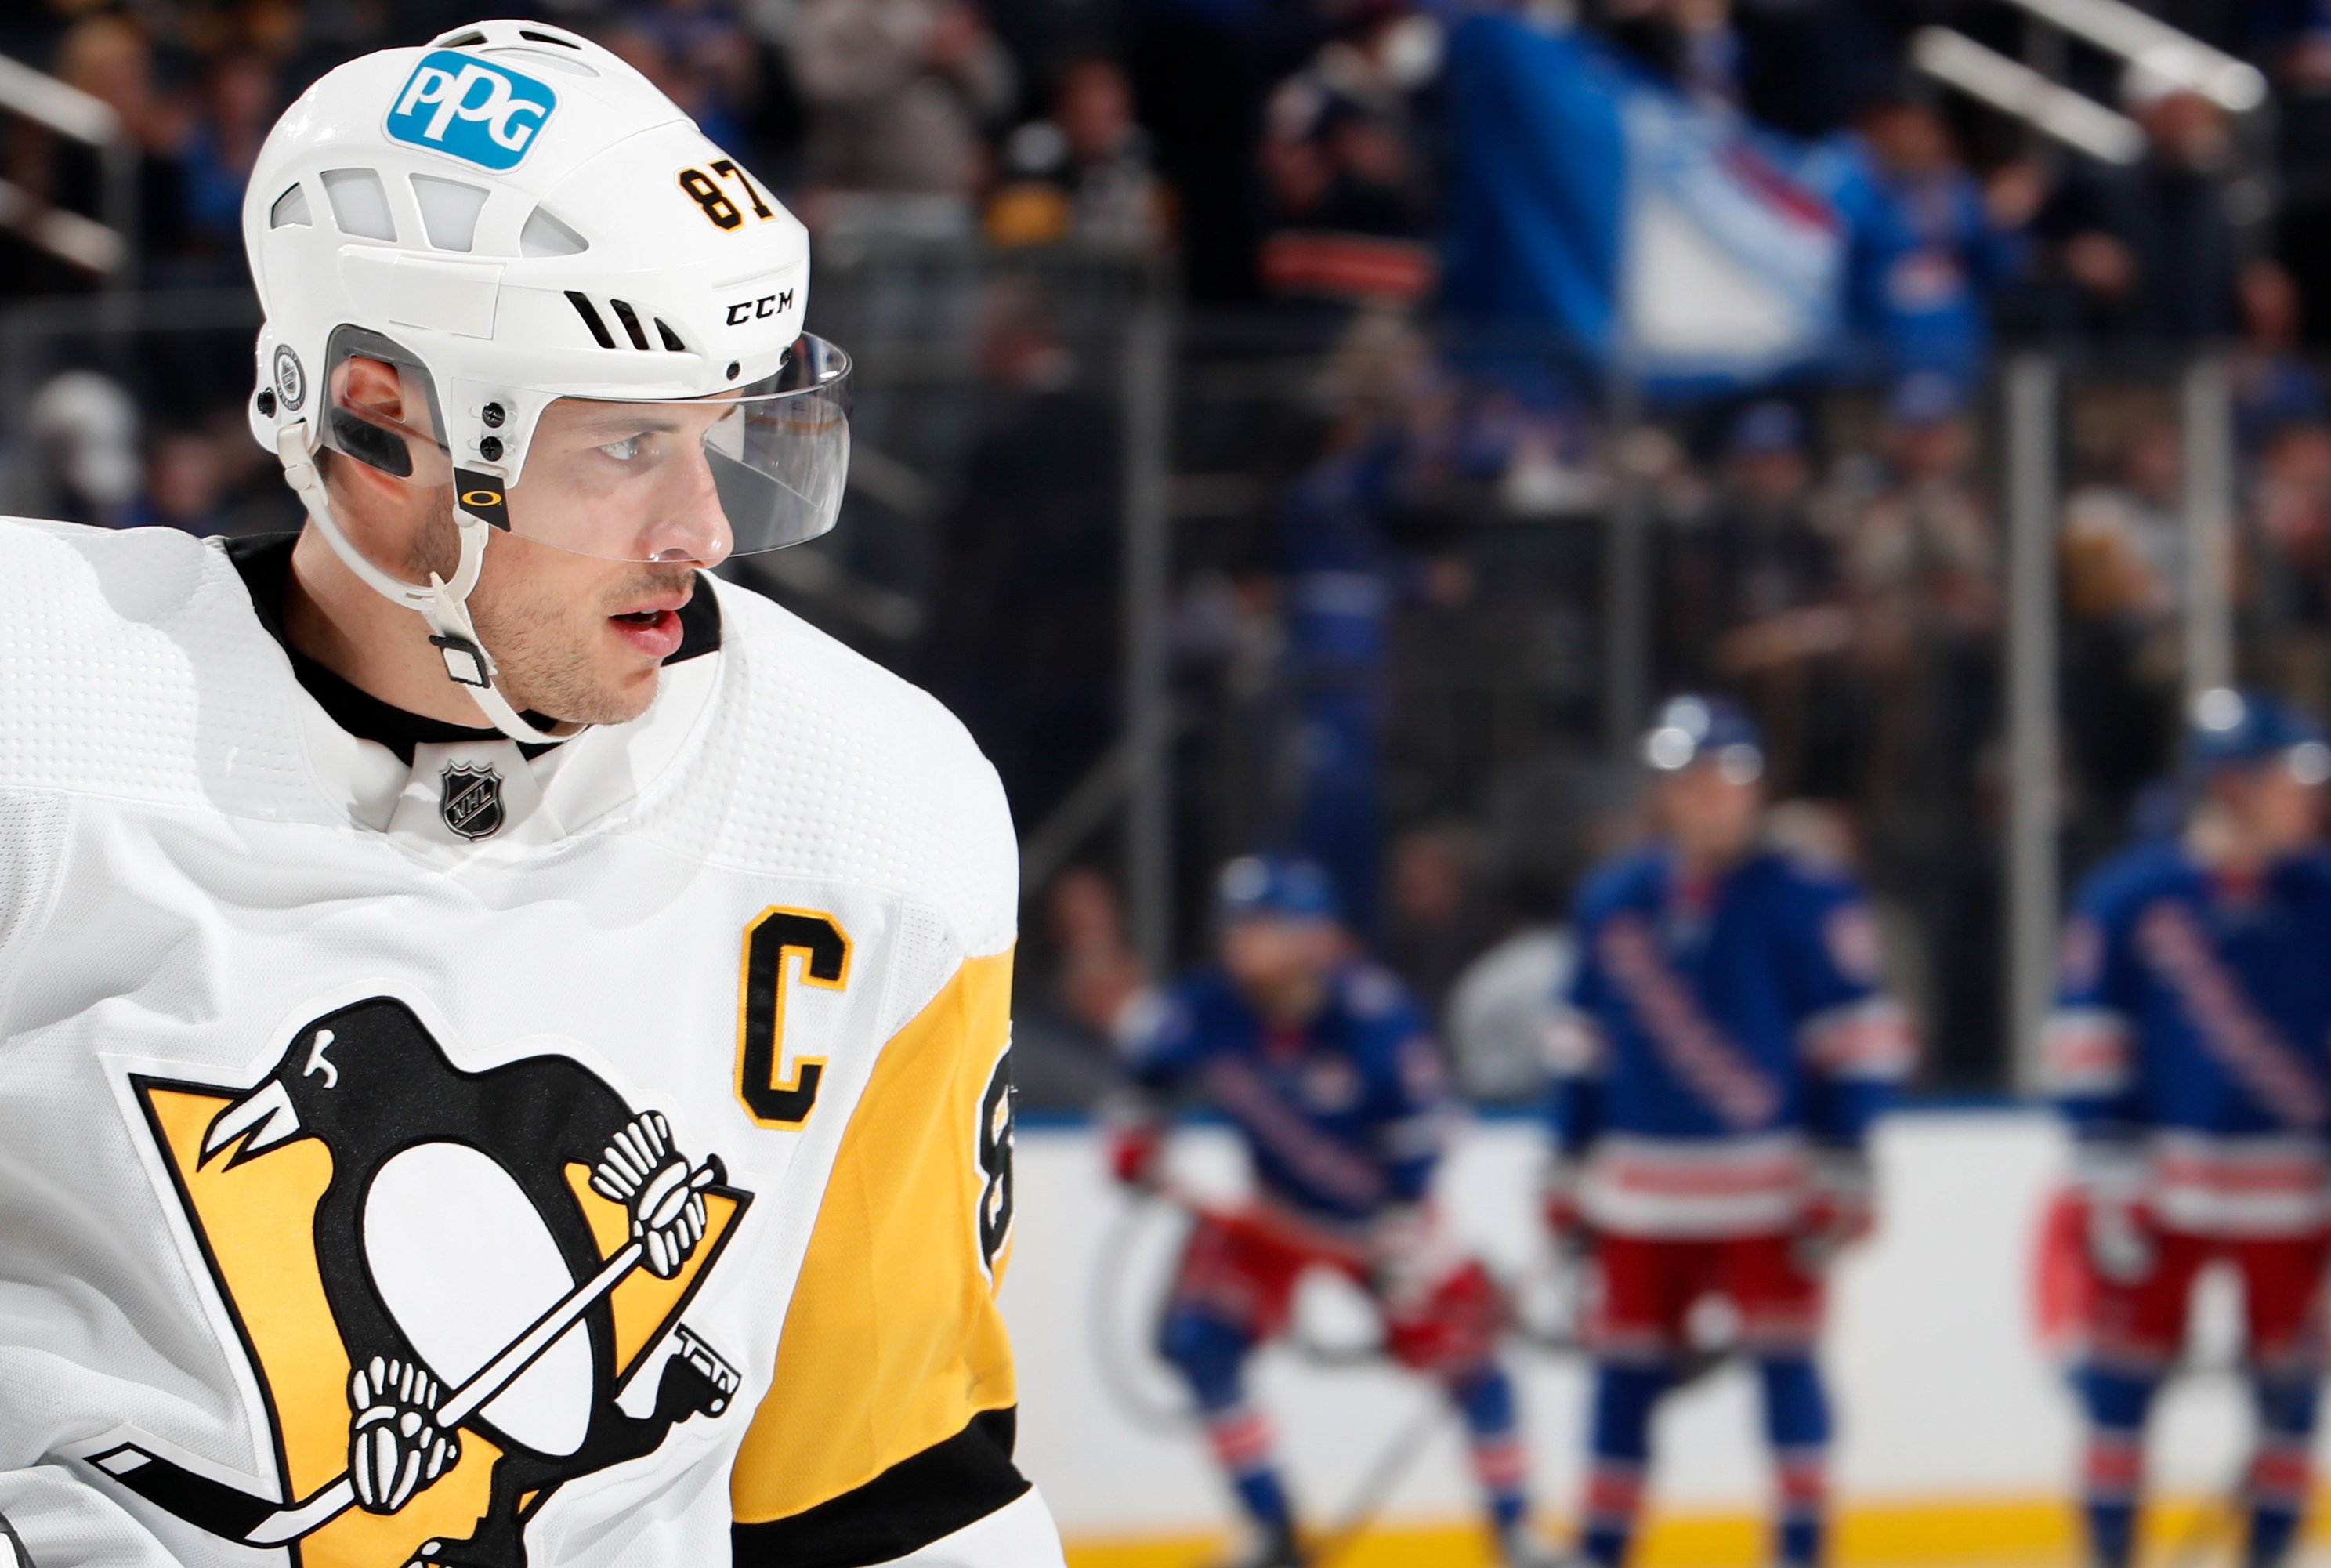 2019-20 Pittsburgh Penguins Roster, Penguins hockey gets underway tonight.  Here are your 2019-20 Pittsburgh Penguins!, By TribLive